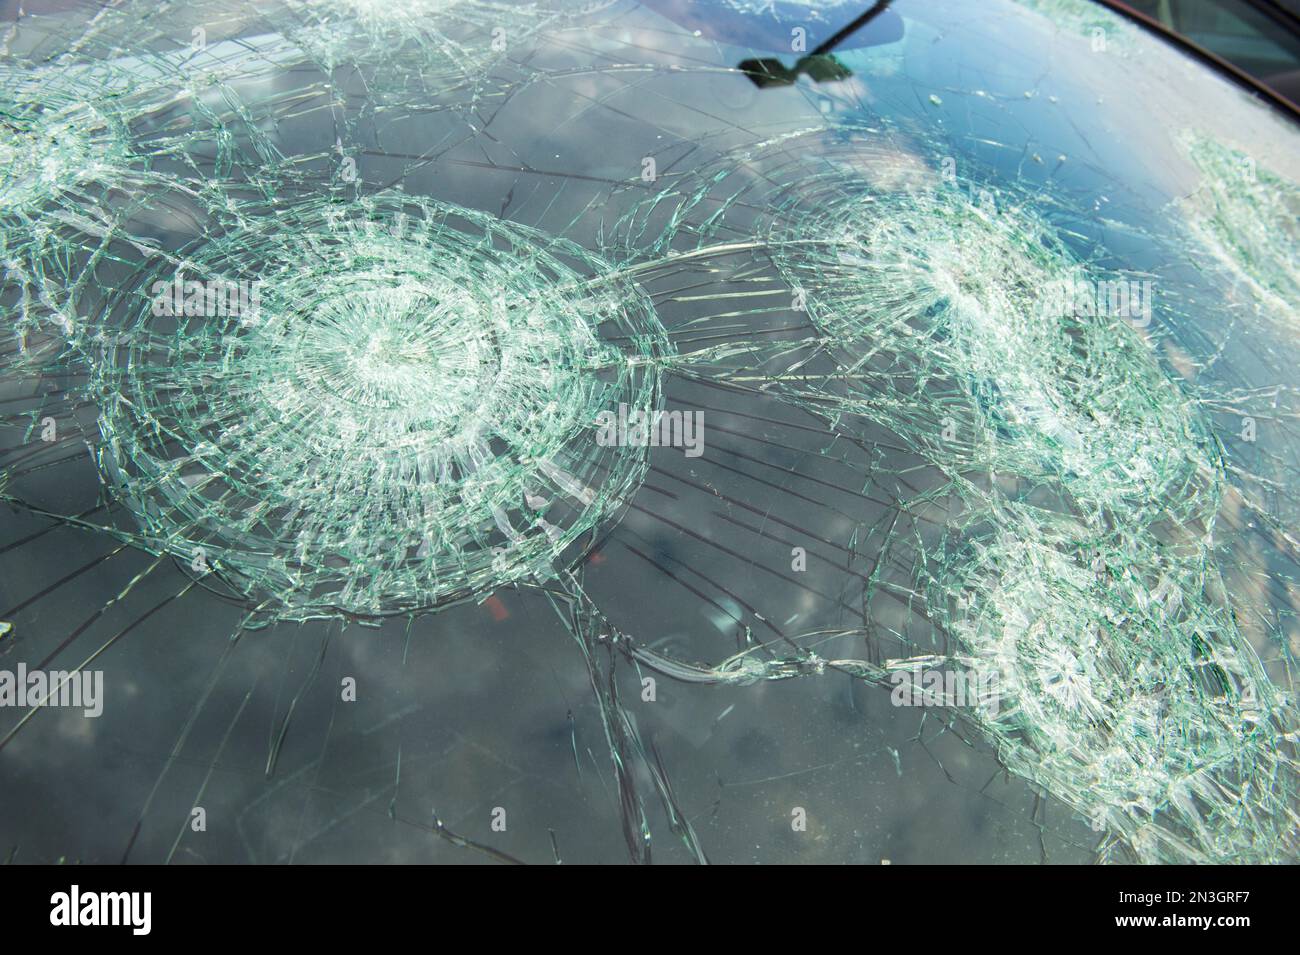 Severe hail damage on the windshield of a parked car; Blair, Nebraska, United States of America Stock Photo